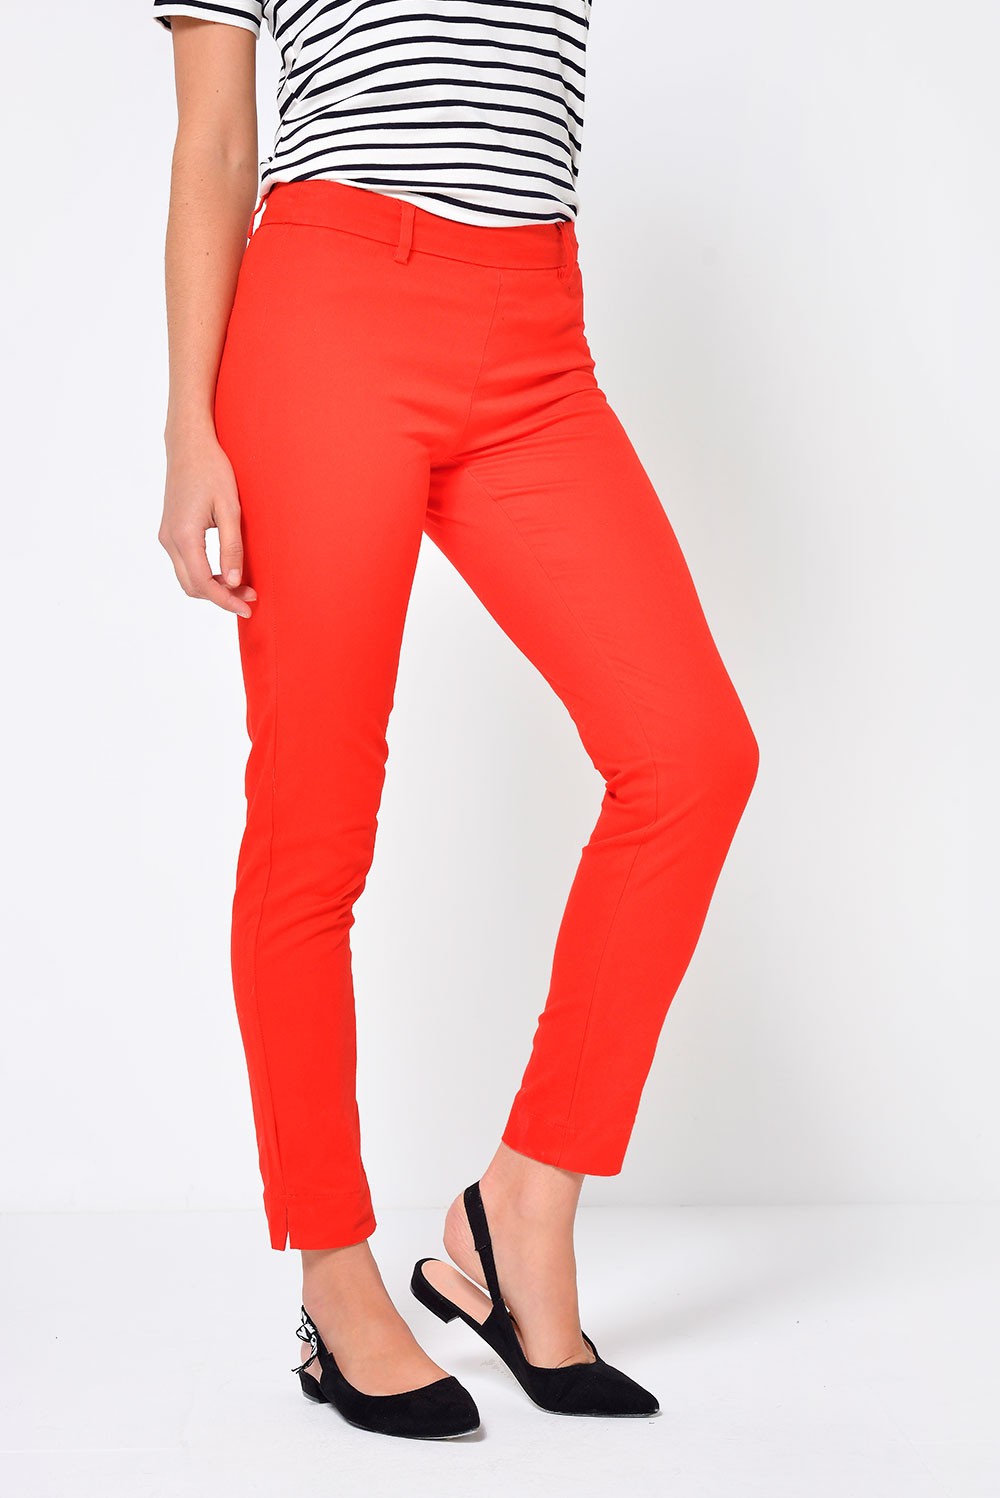 JDY Power Pant in Red | iCLOTHING